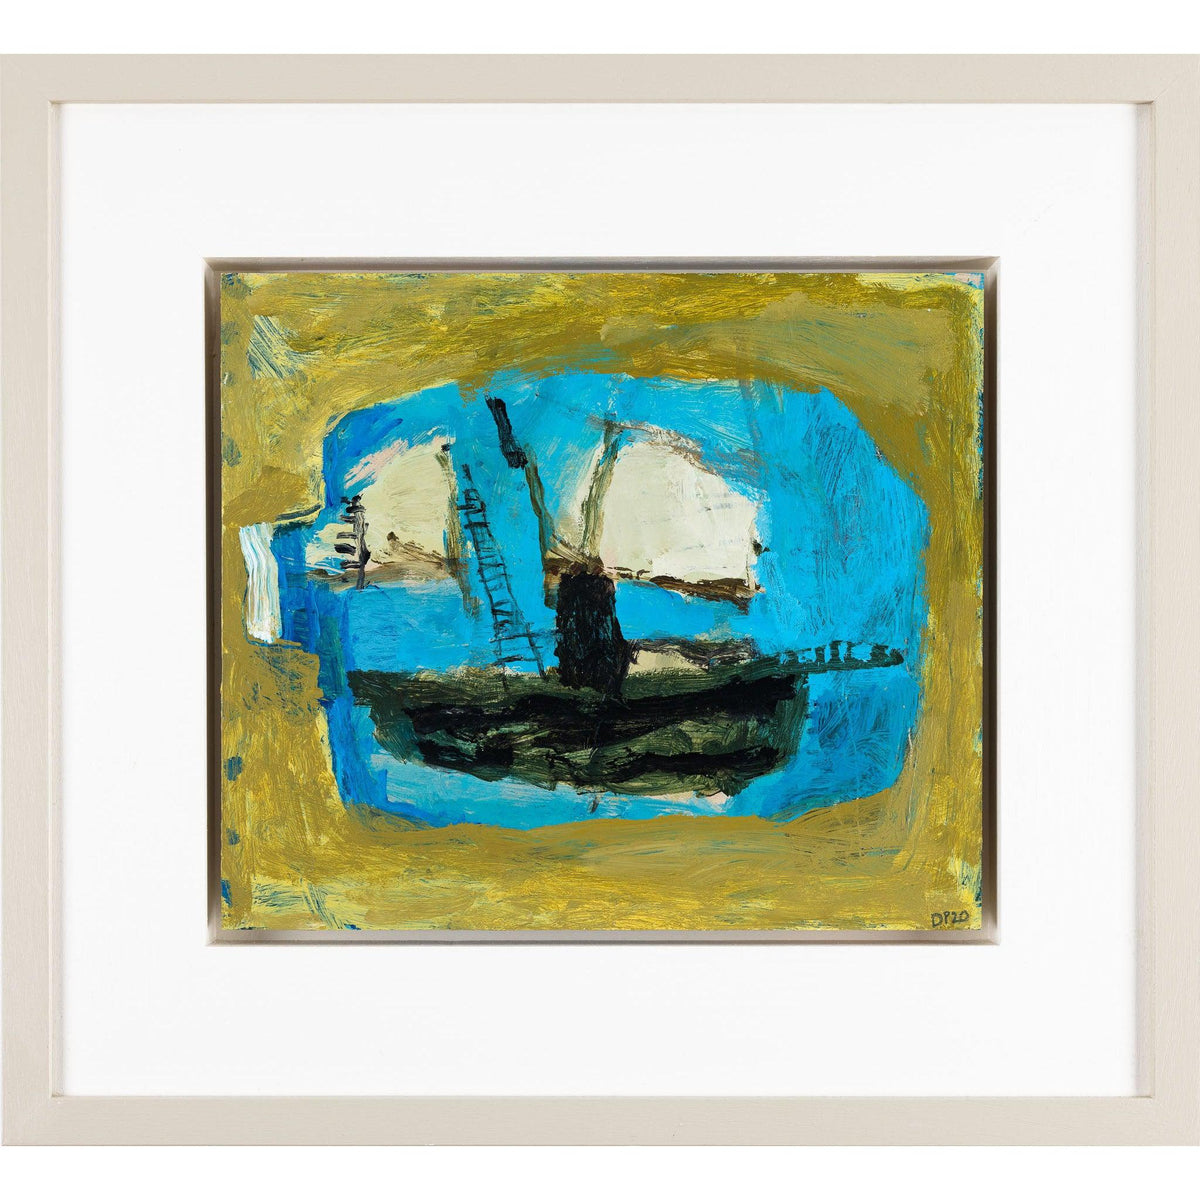 &#39;Raise the Sails&#39; mixed media original by David Pearce, available at Padstow Gallery, Cornwall